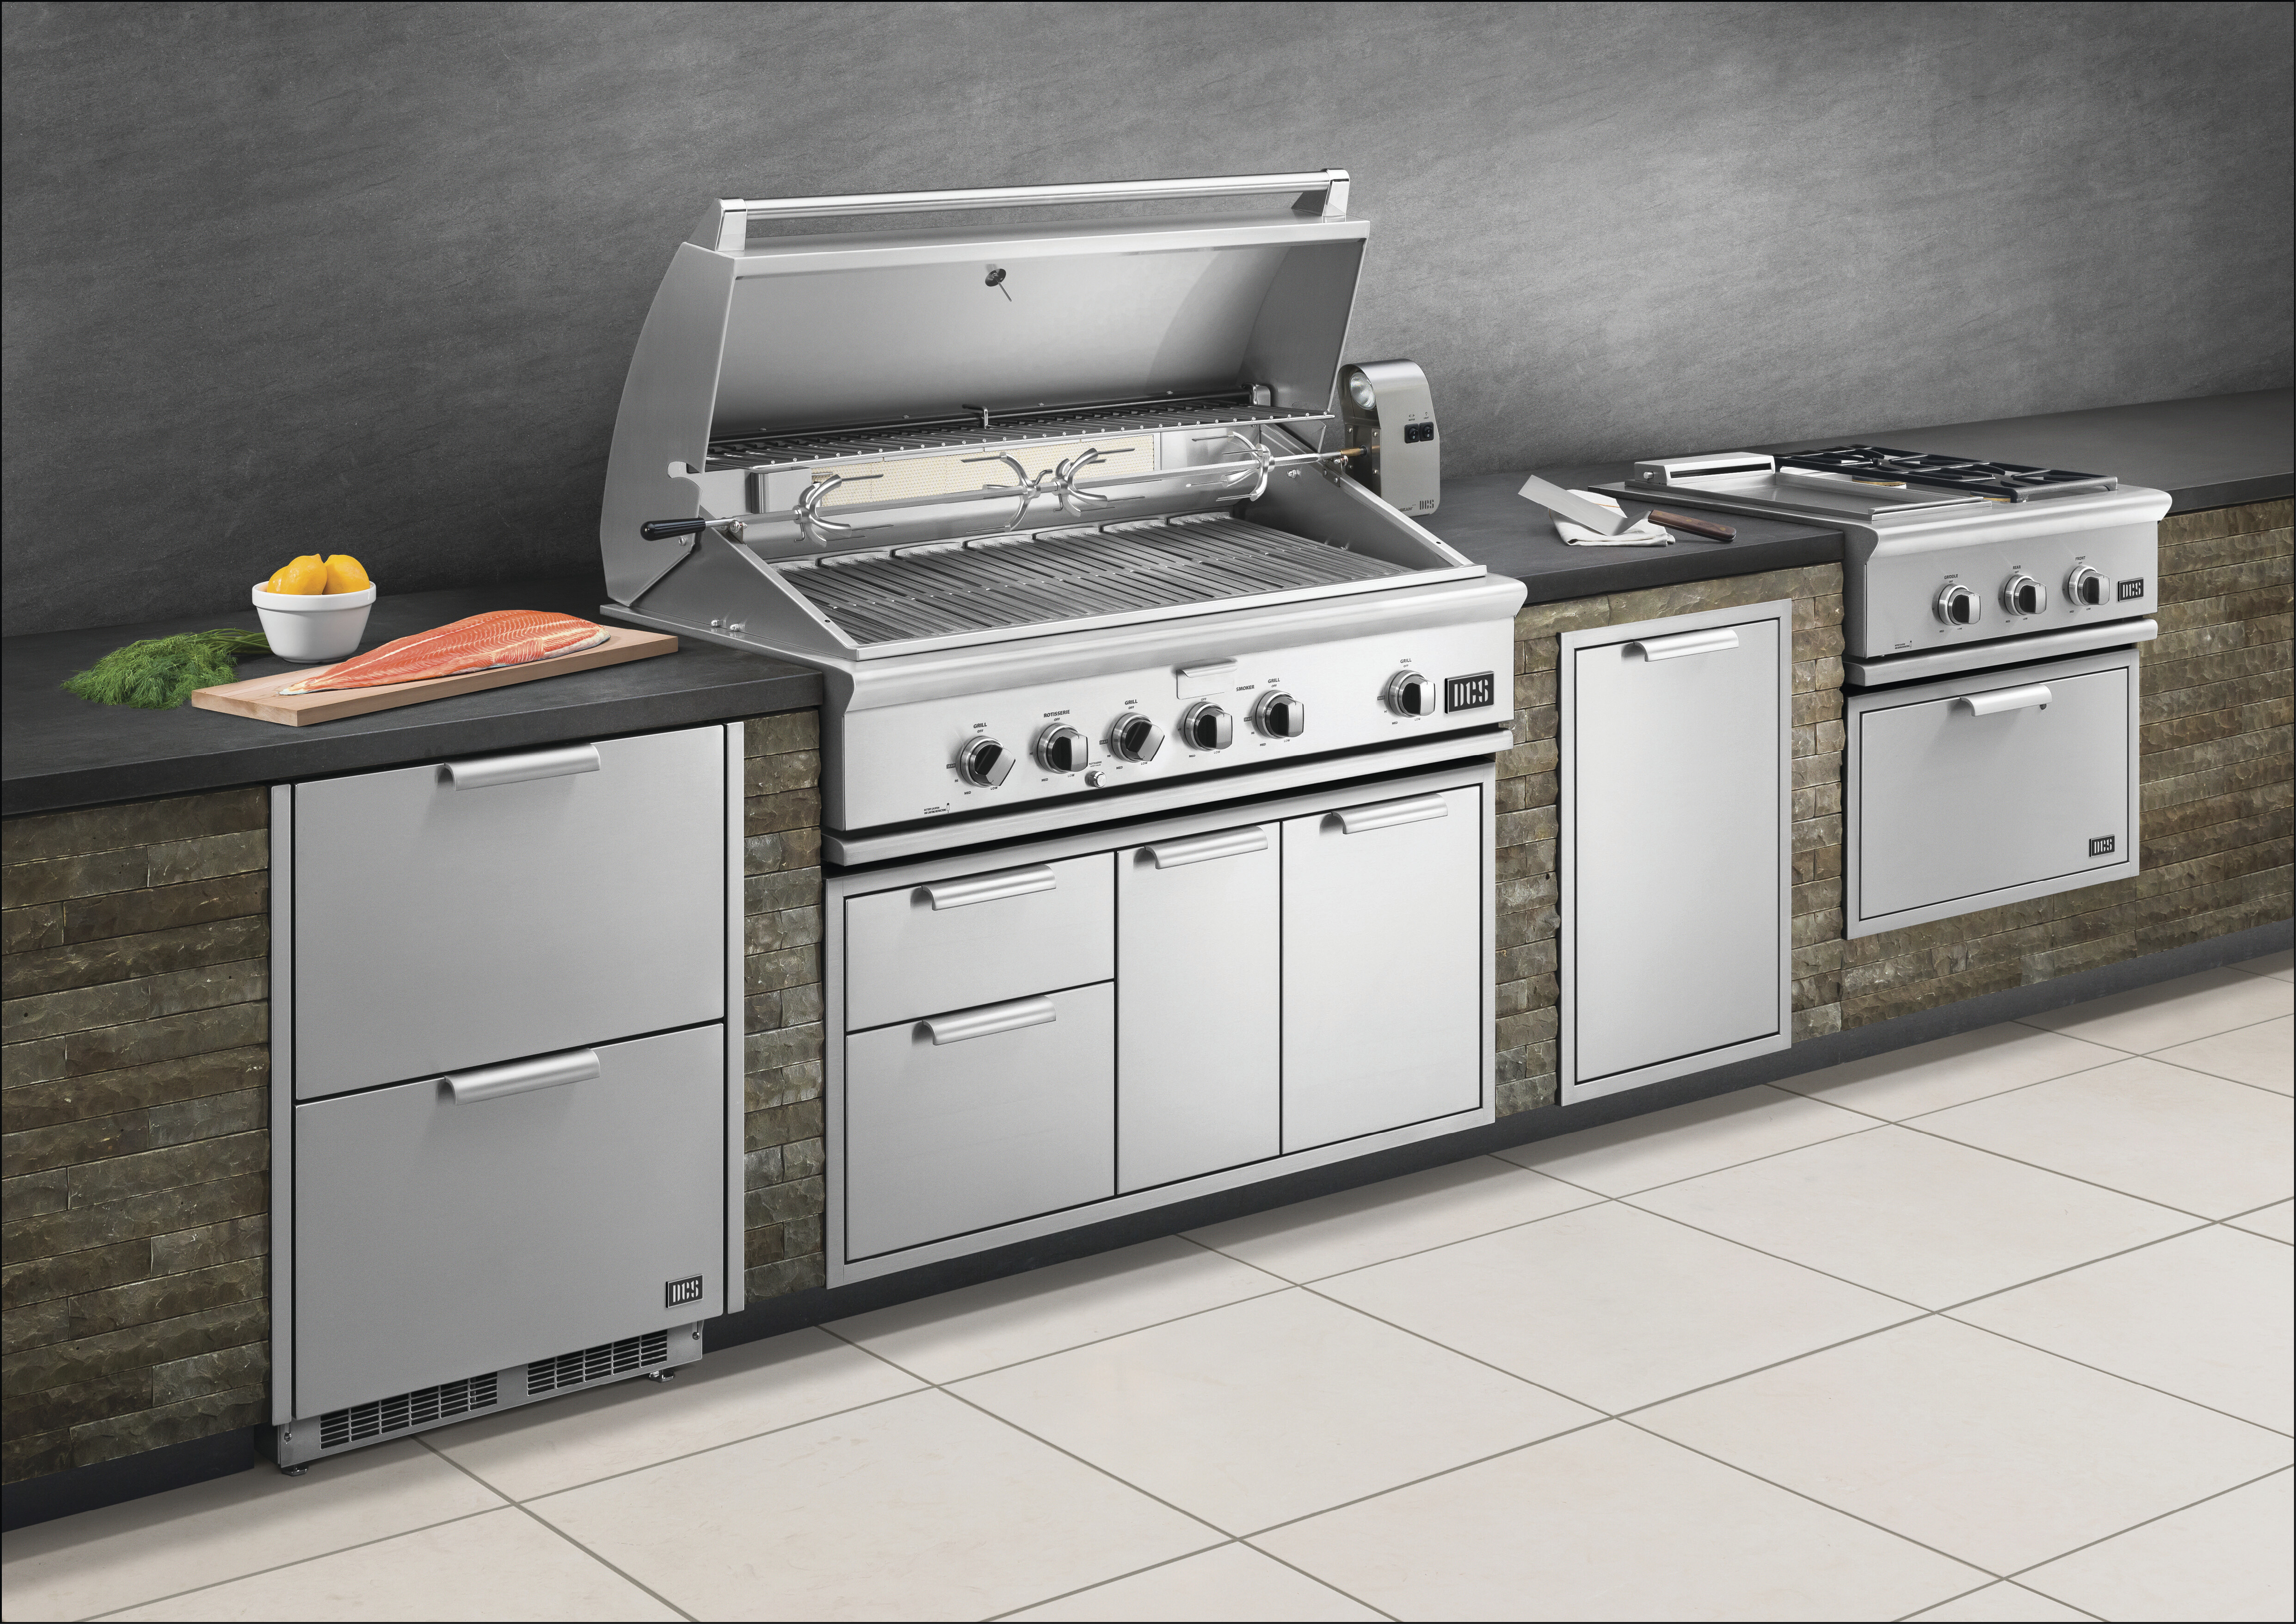 Wide shot of several DCS appliances in an outdoor kitchen 